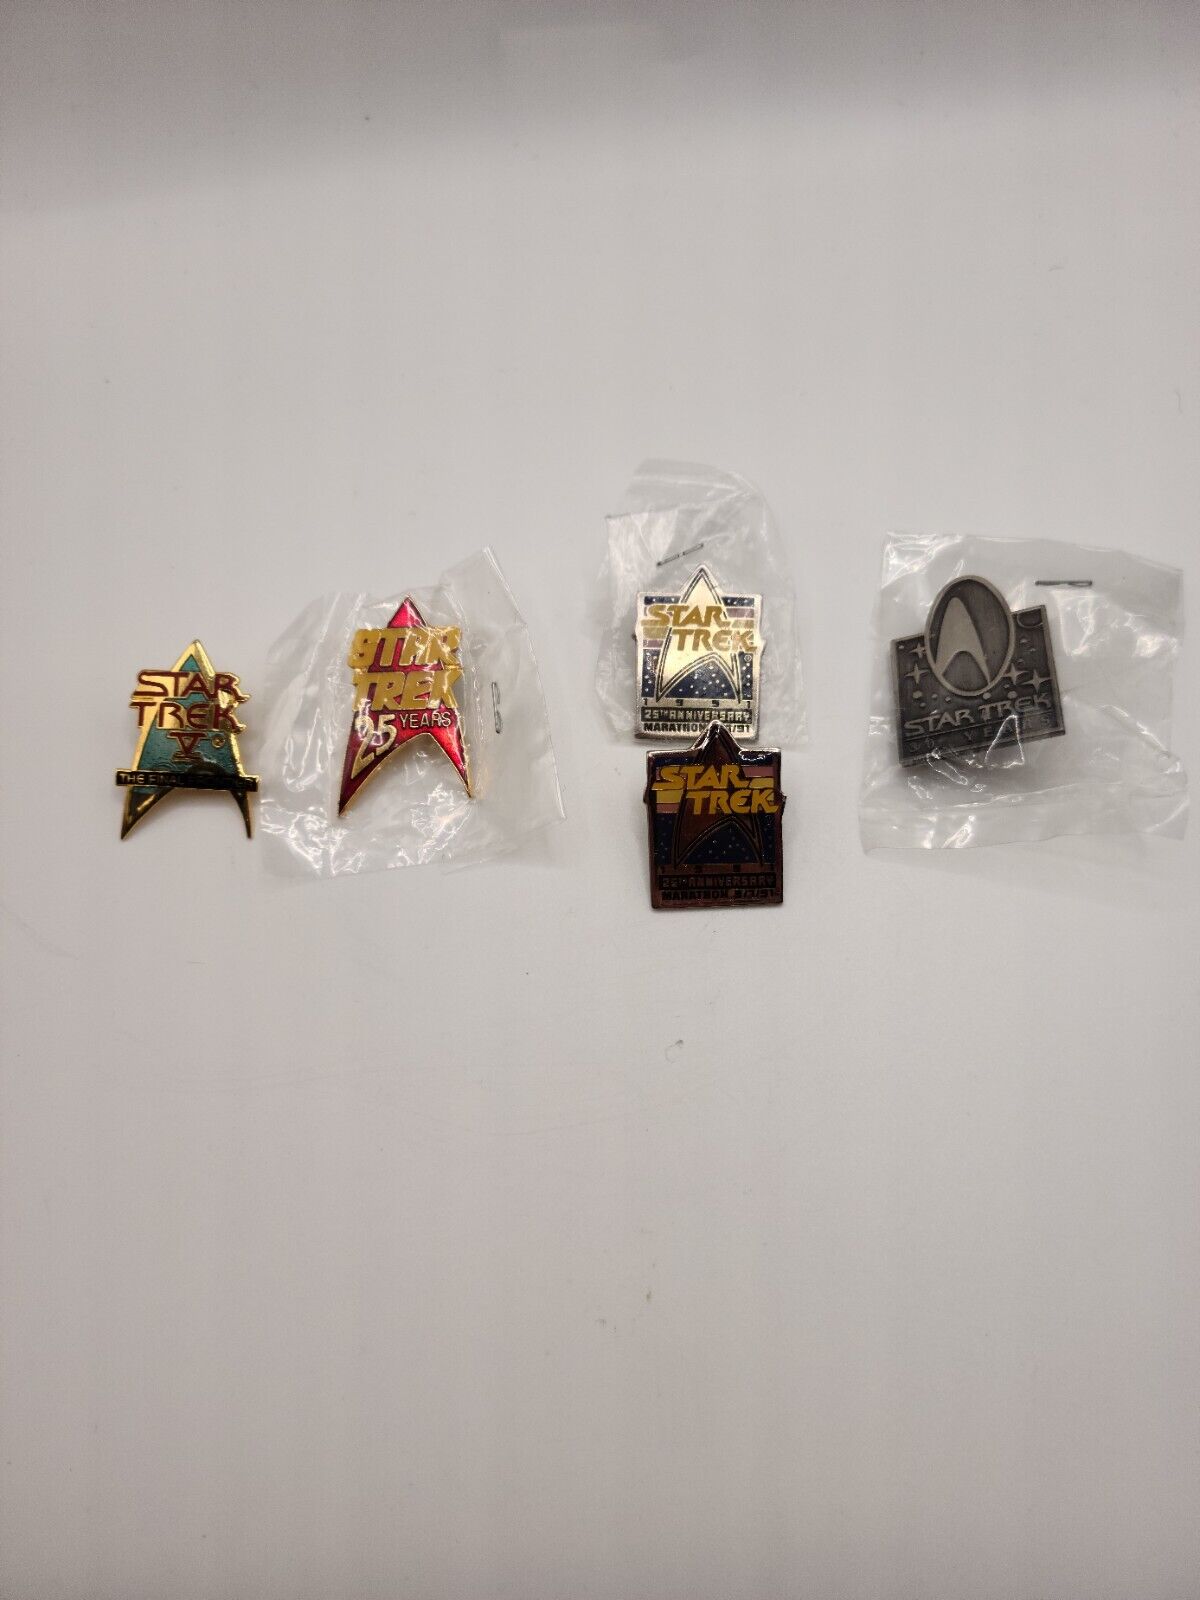 Star Trek Pin 25th And 30th Year Vintage Set Of 5